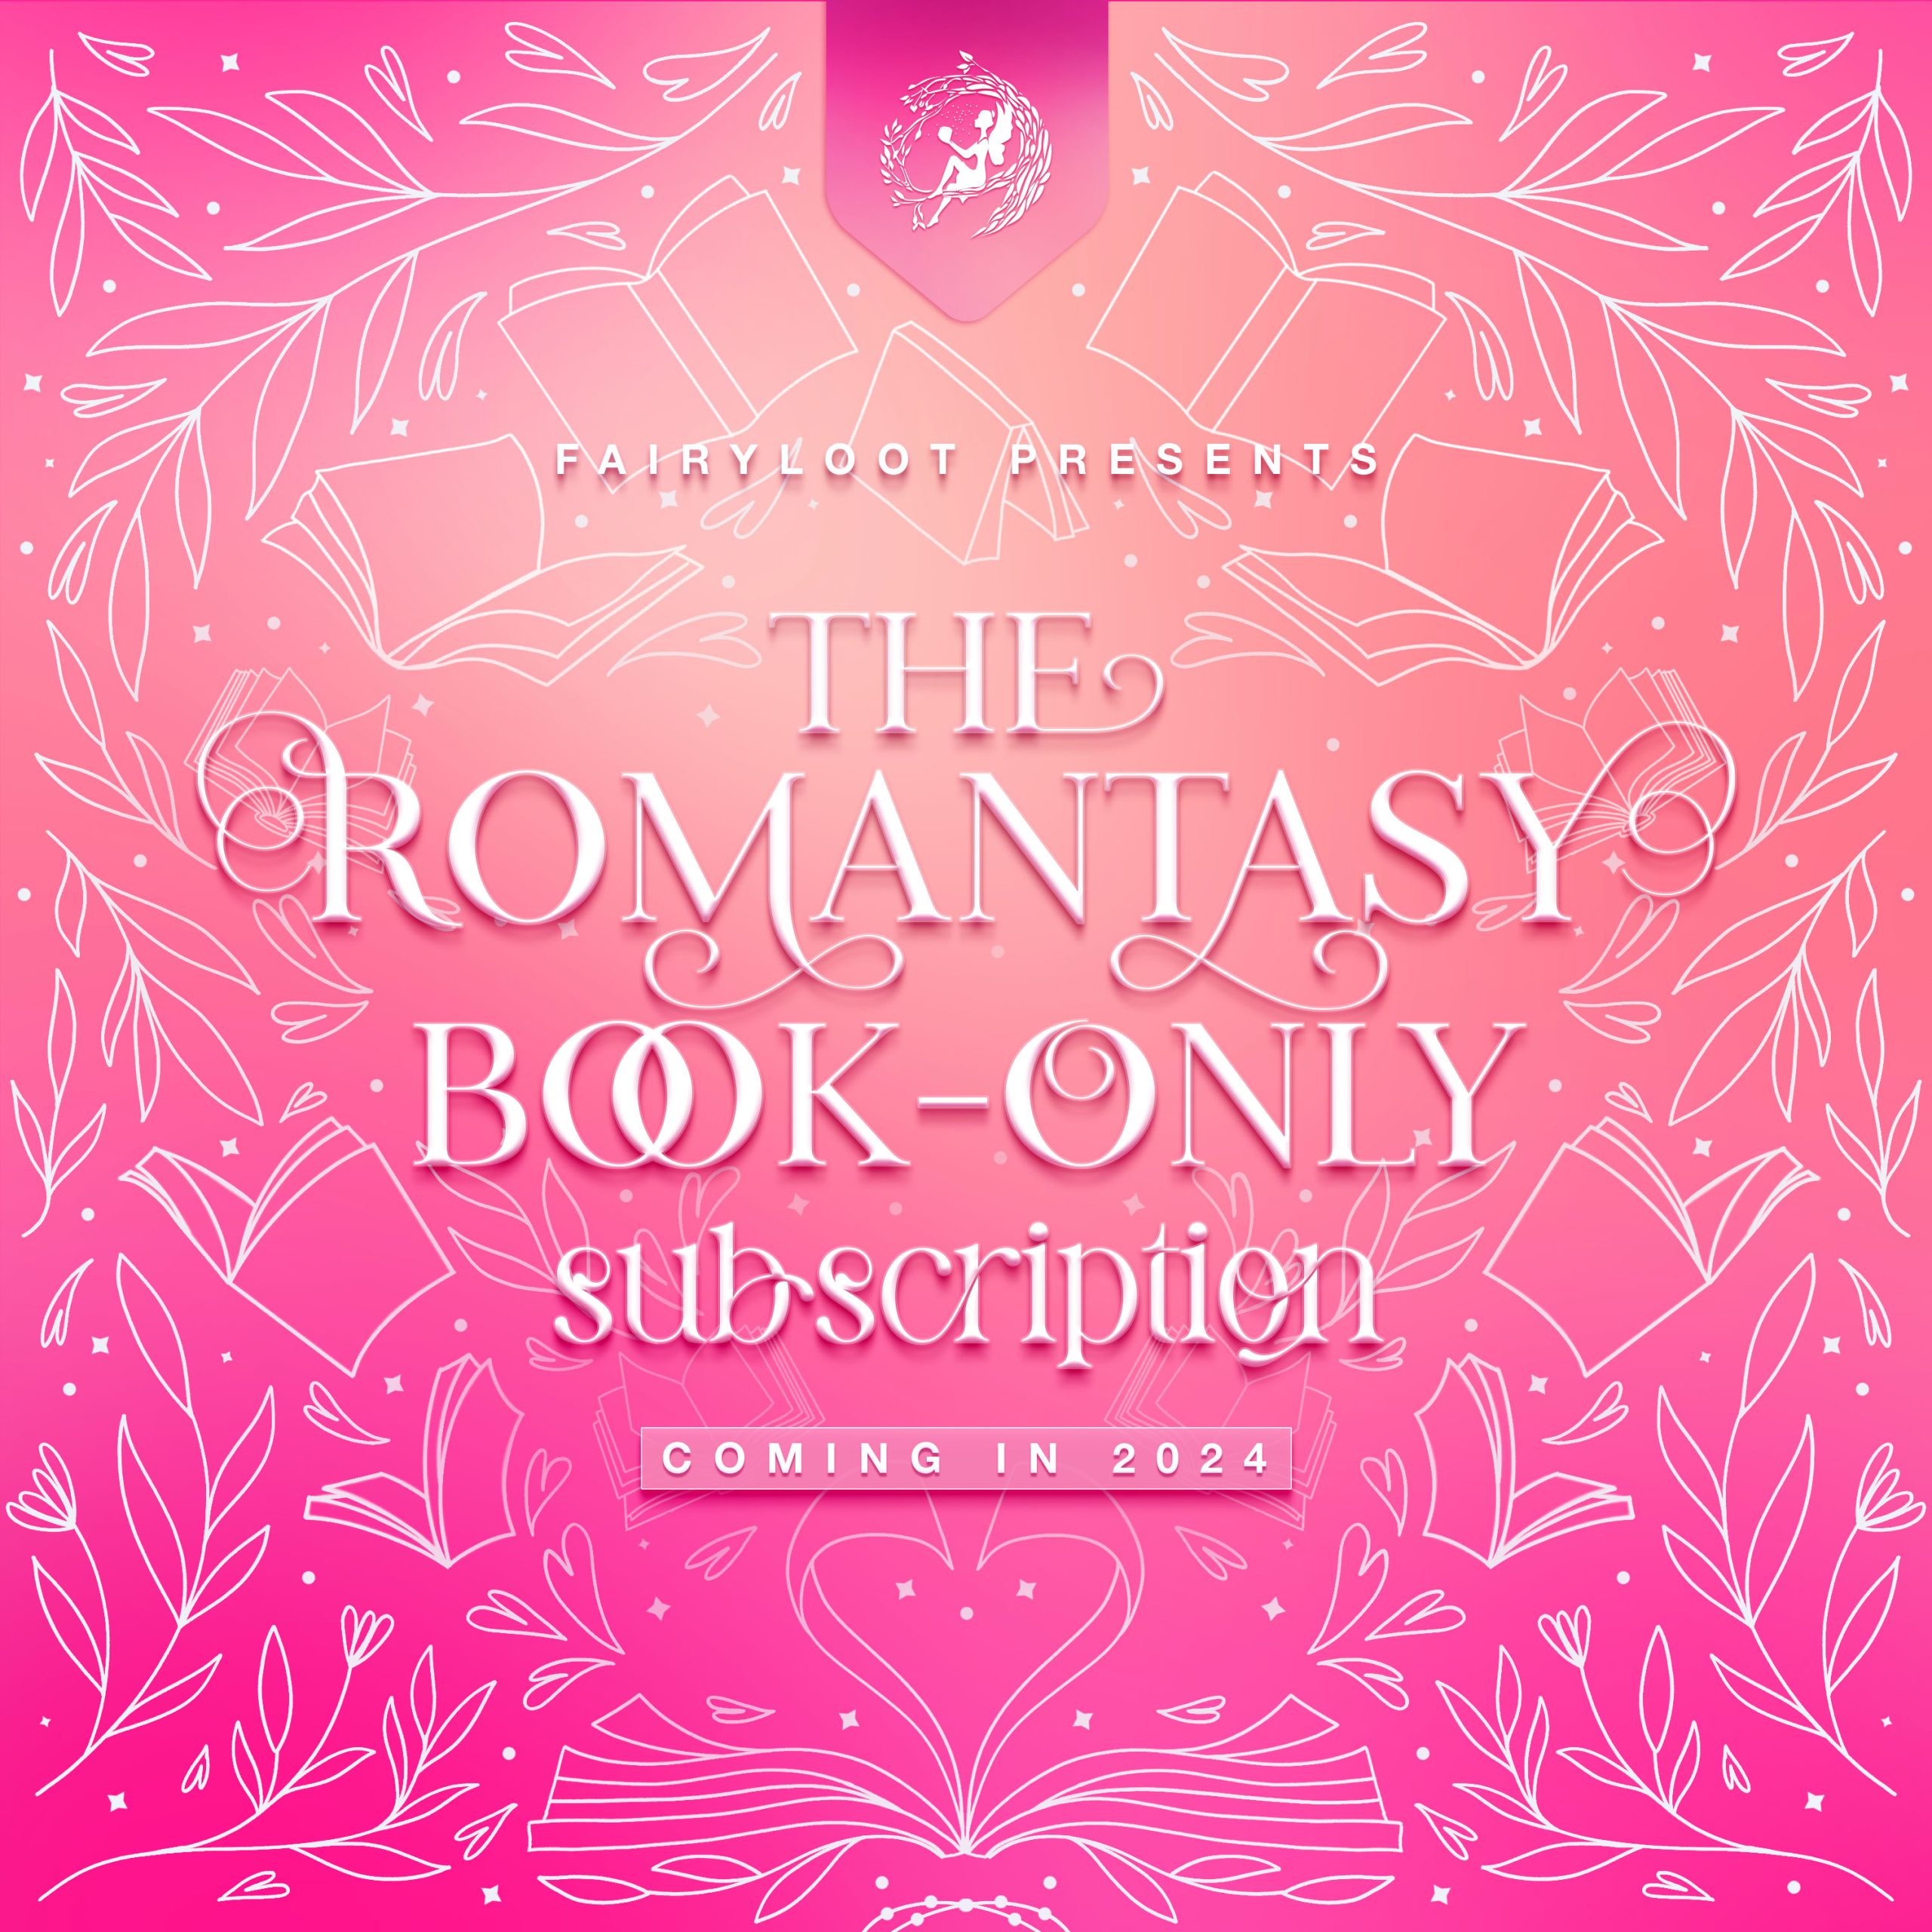 Romantasy Book-Only Subscription